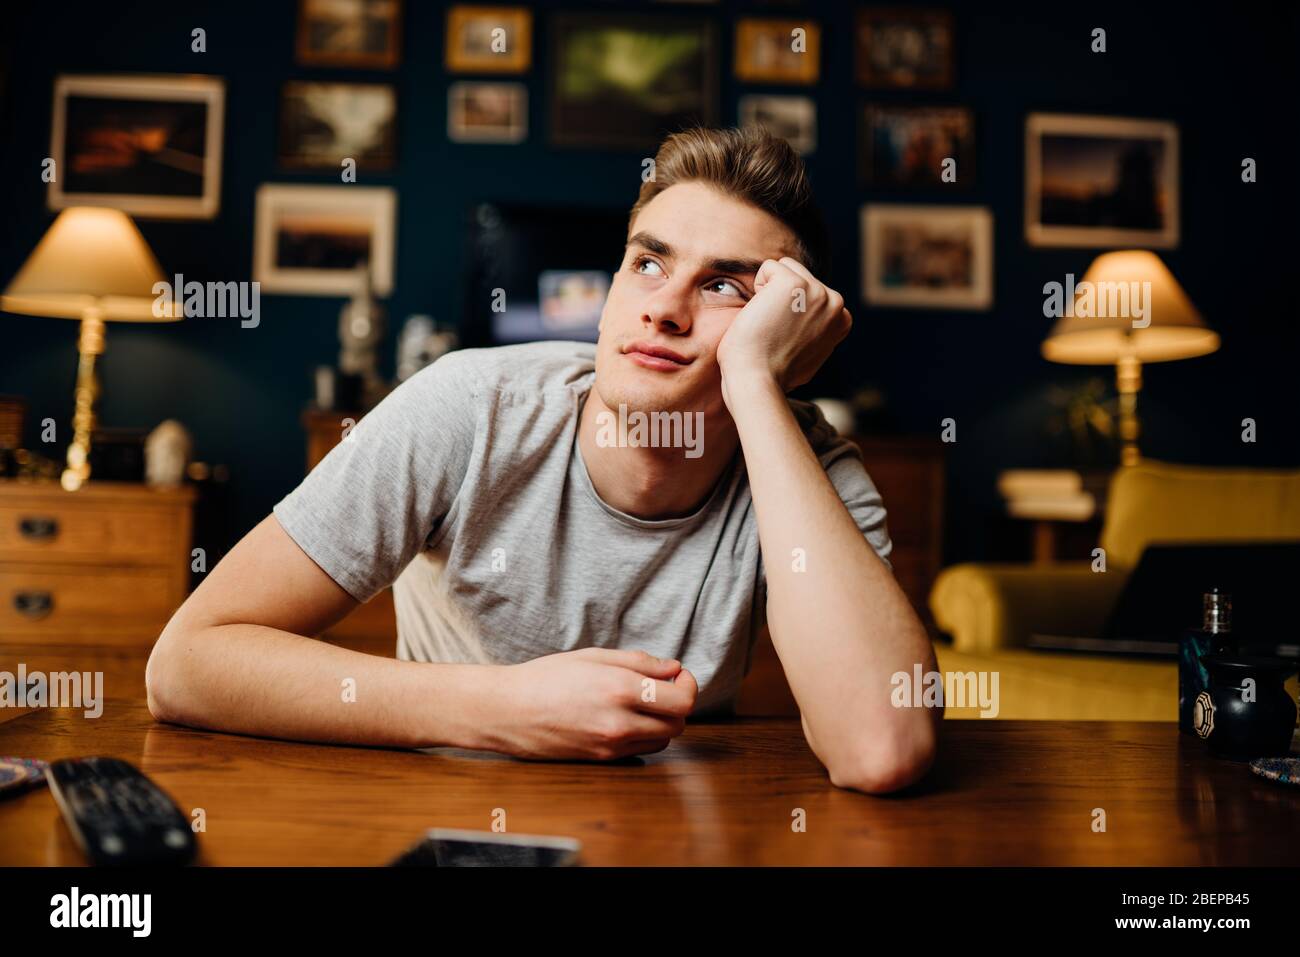 Thinking sad man in bad mood overthinking problems.Bored staying at home.Quarantine mental health effect.Self-isolation emotional challenge.Having an Stock Photo